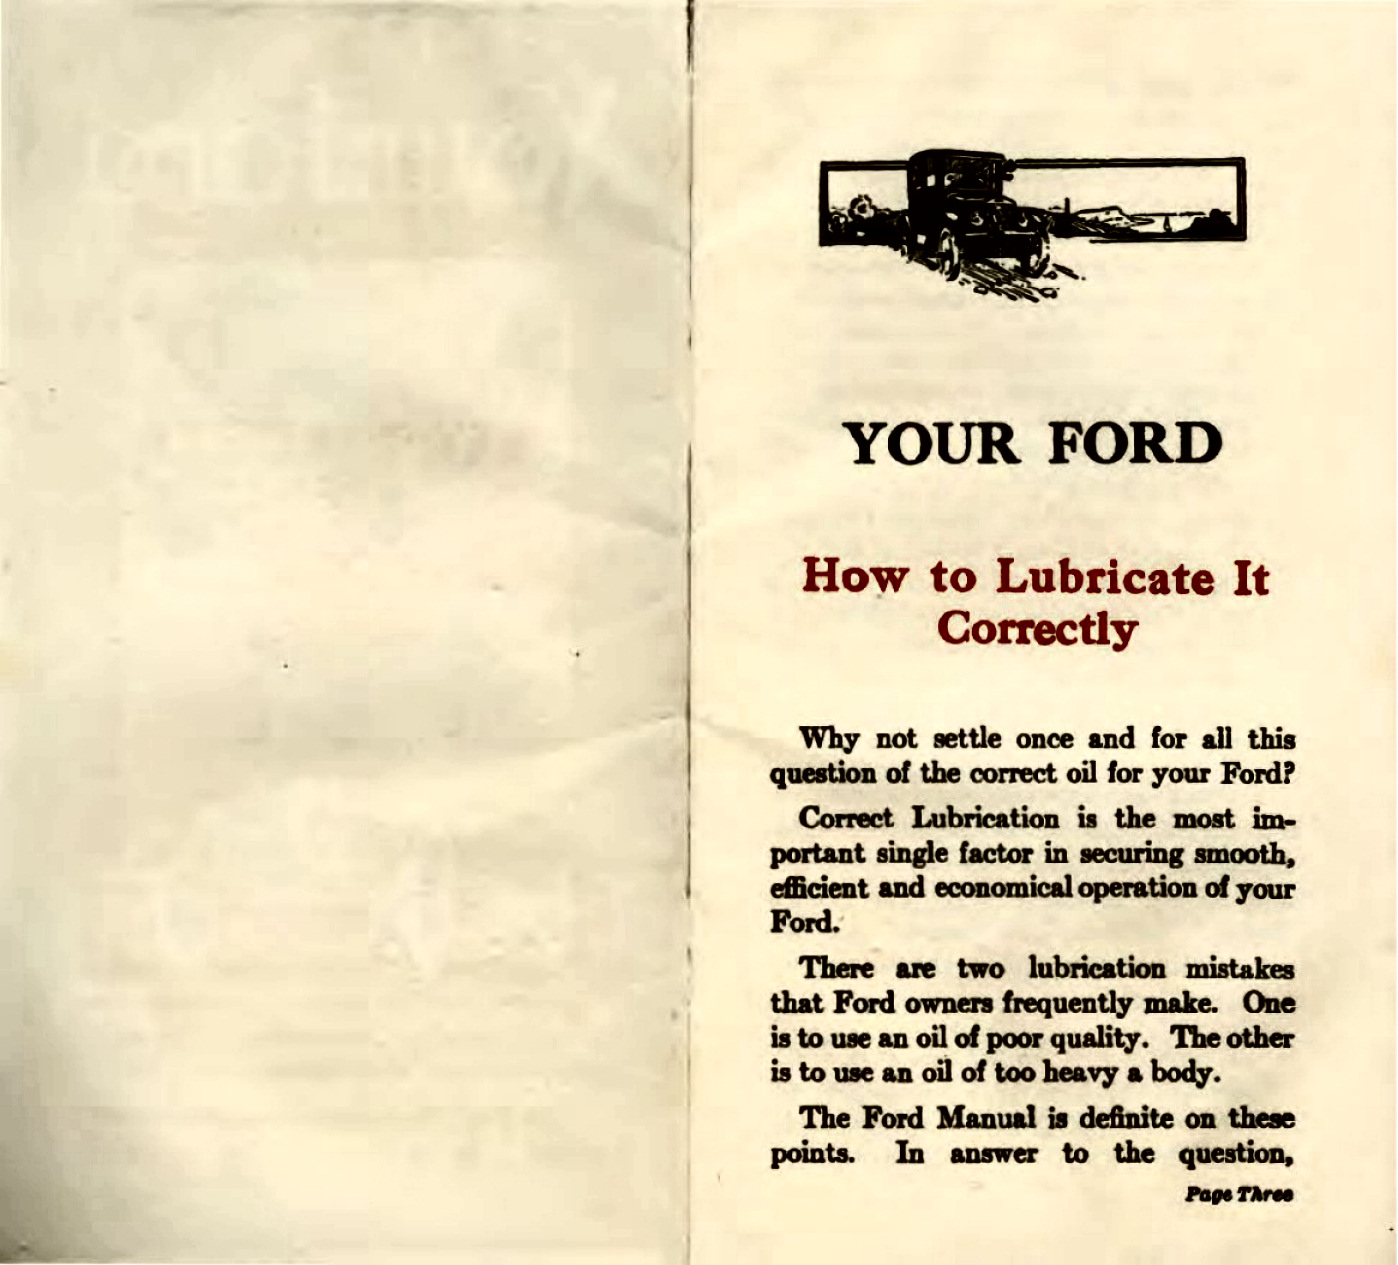 1923_Ford_Lube_Booklet-02-03